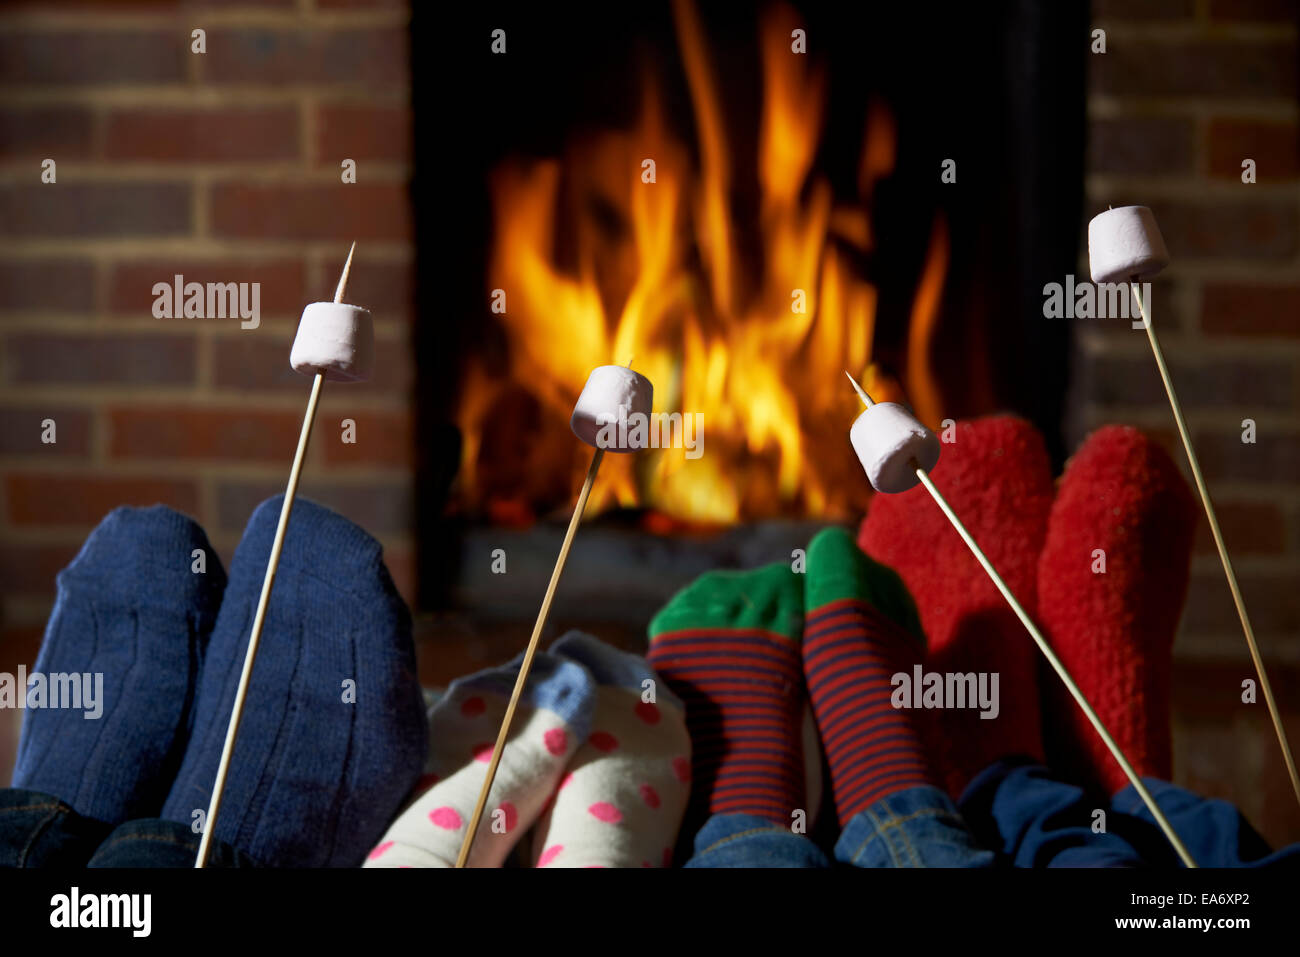 Family Toasting Marshmallows By Open Fire At Home Stock Photo